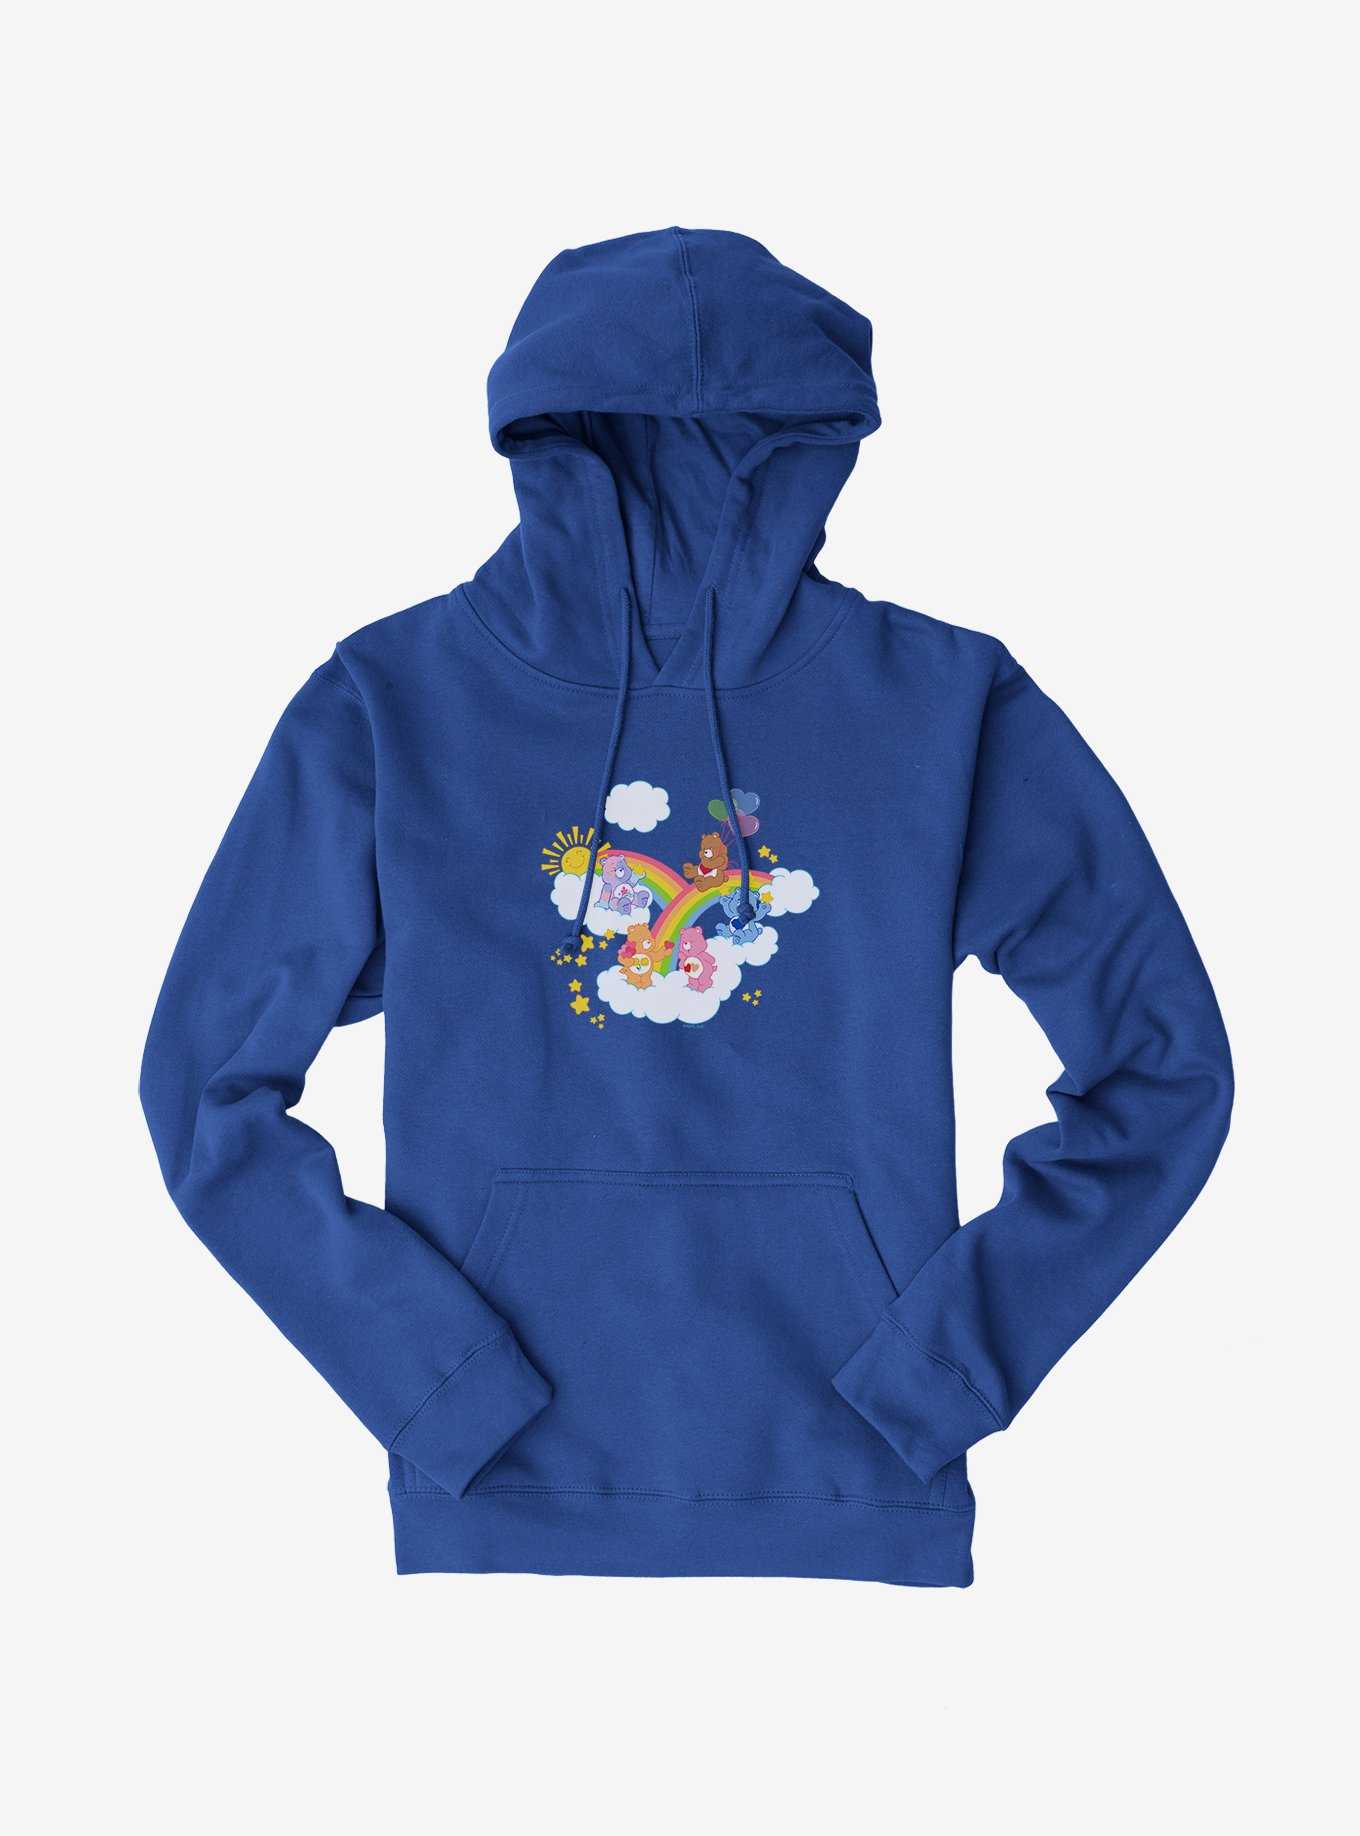 Care Bears Over The Rainbow Hoodie, ROYAL BLUE, hi-res